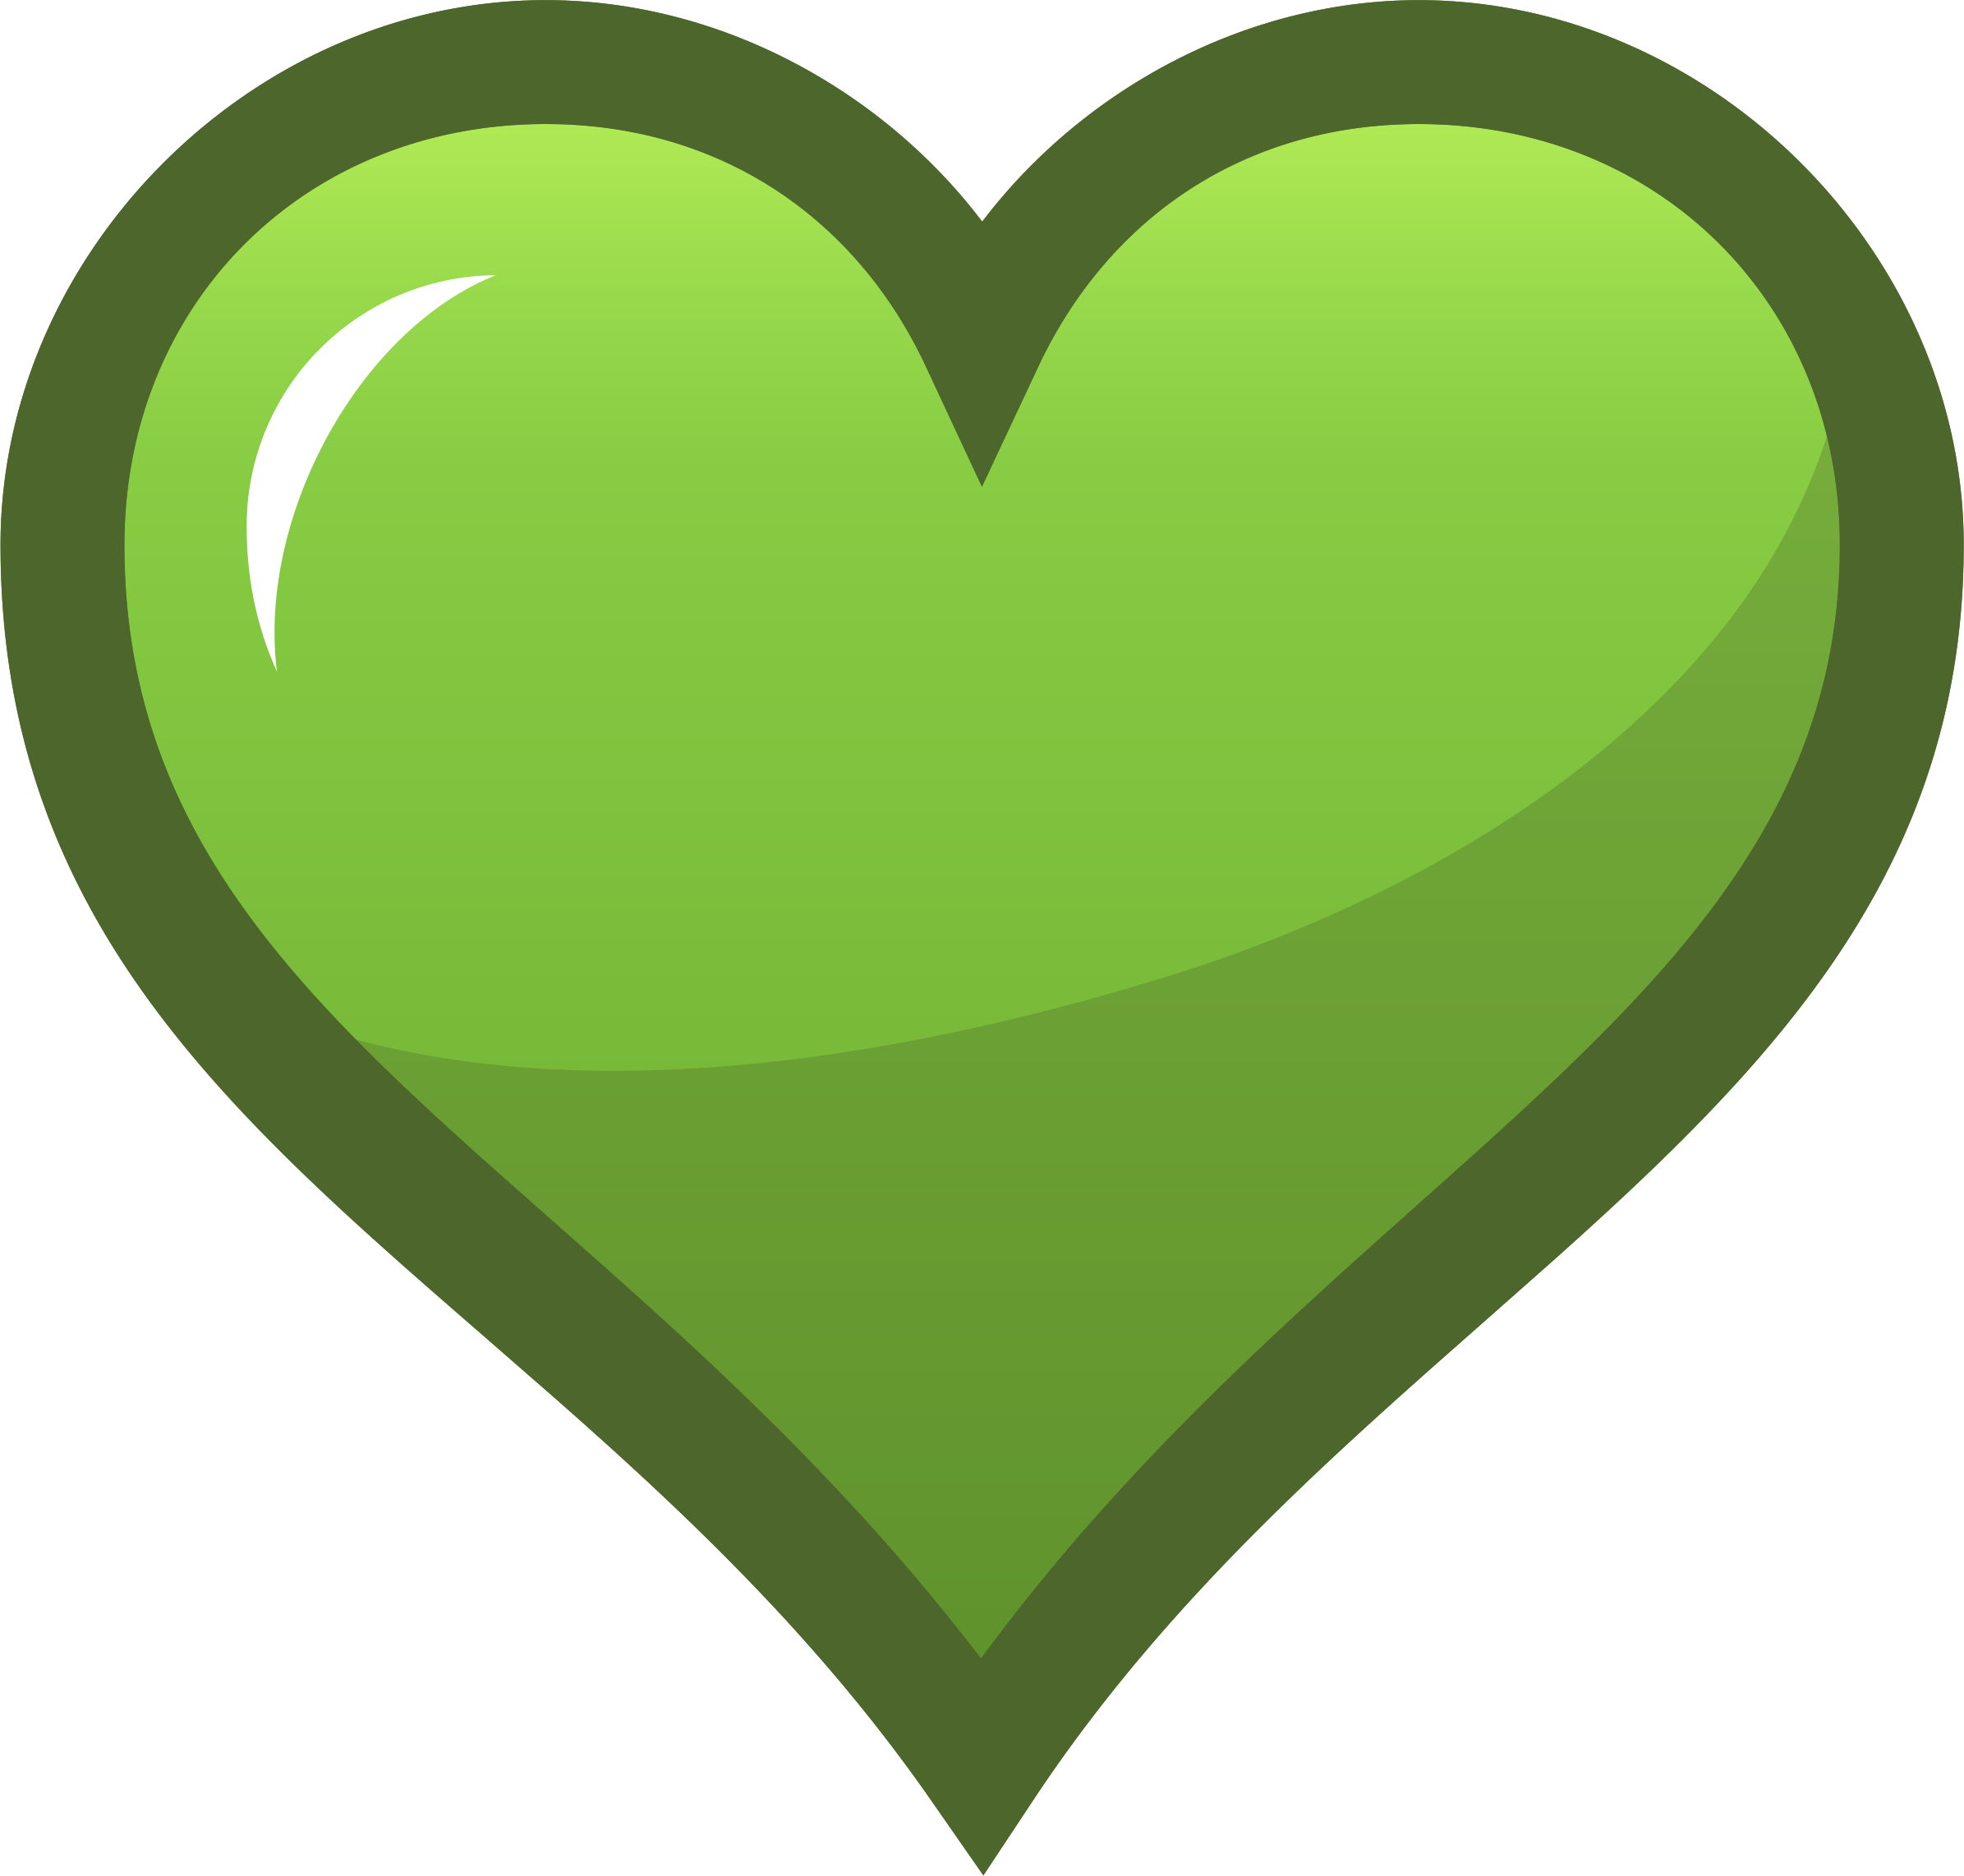 Orange Heart Icon Ocal Favorites Icon Selected Orange - Green Heart Icon Free, Hd Png Download